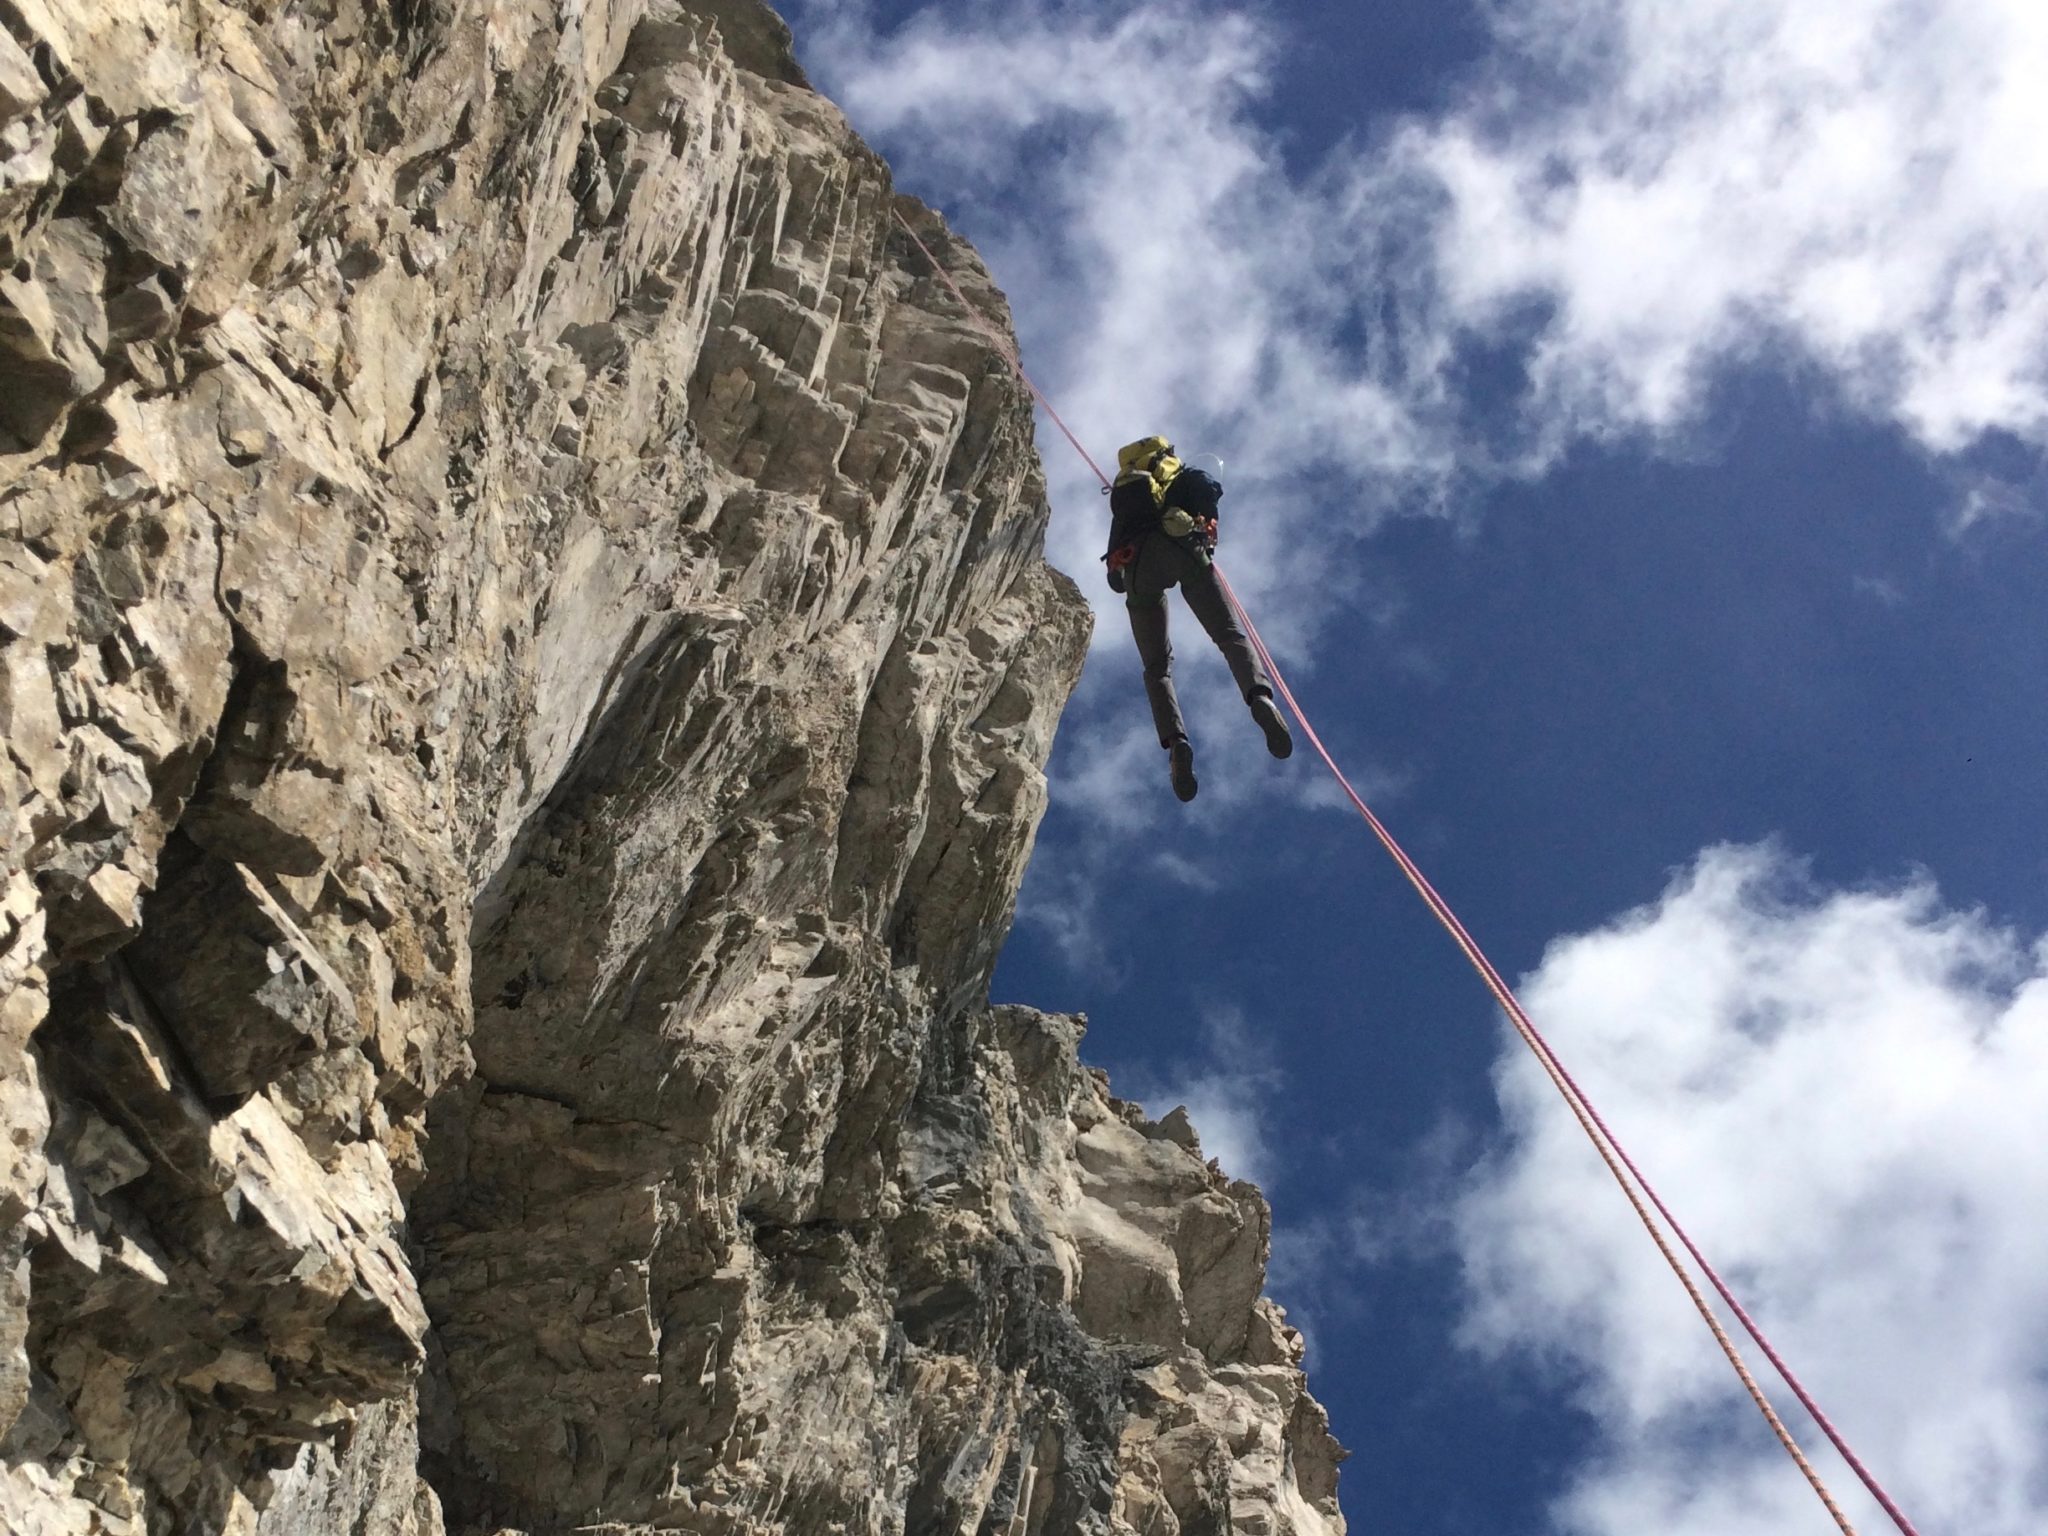 Rappeling down from a multipitch rock climb in Kananaskis